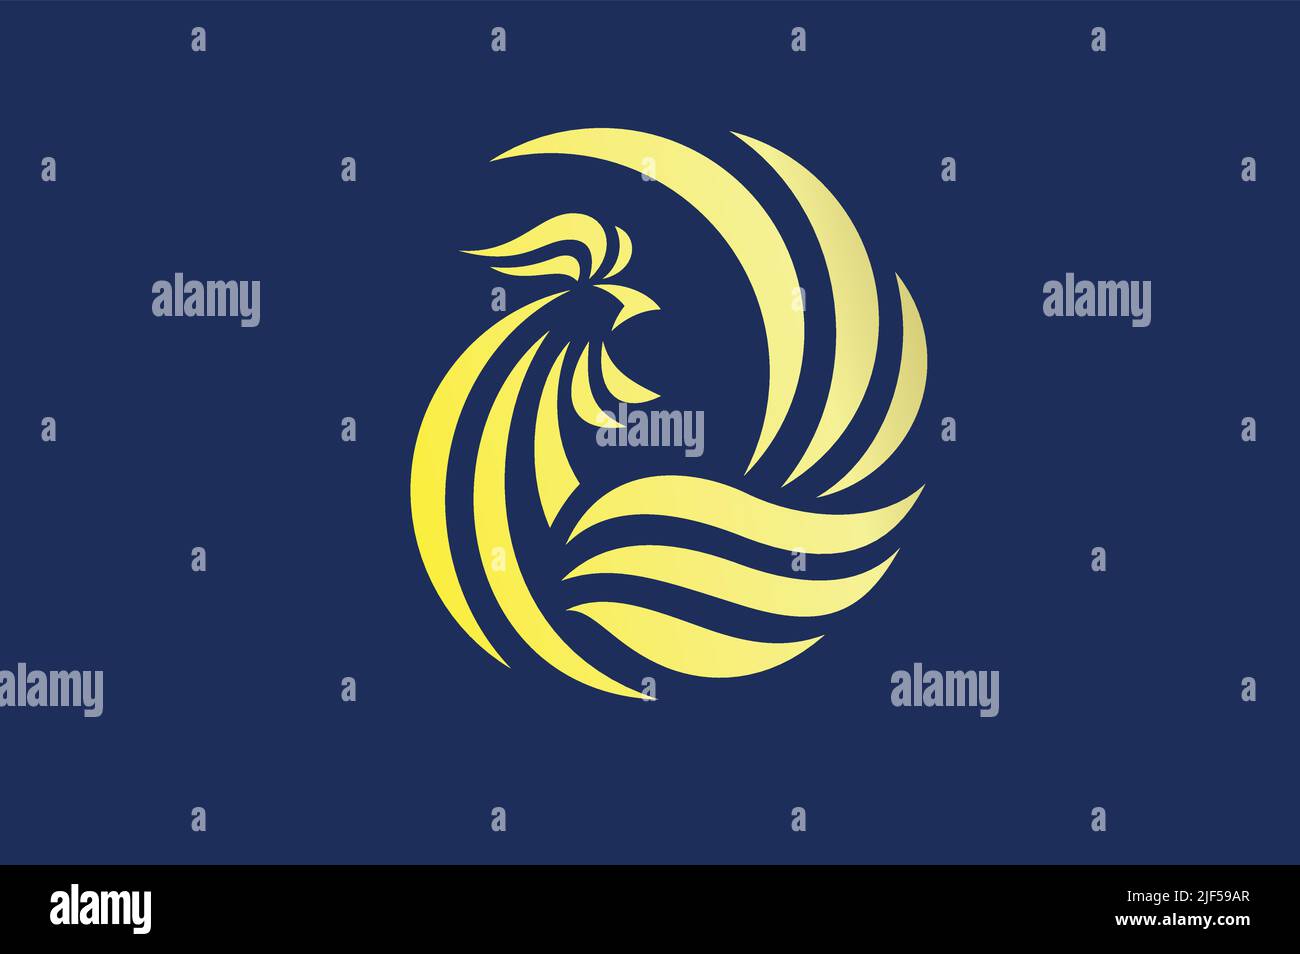 Abstract Design of Rooster Round Logo Template Stock Vector